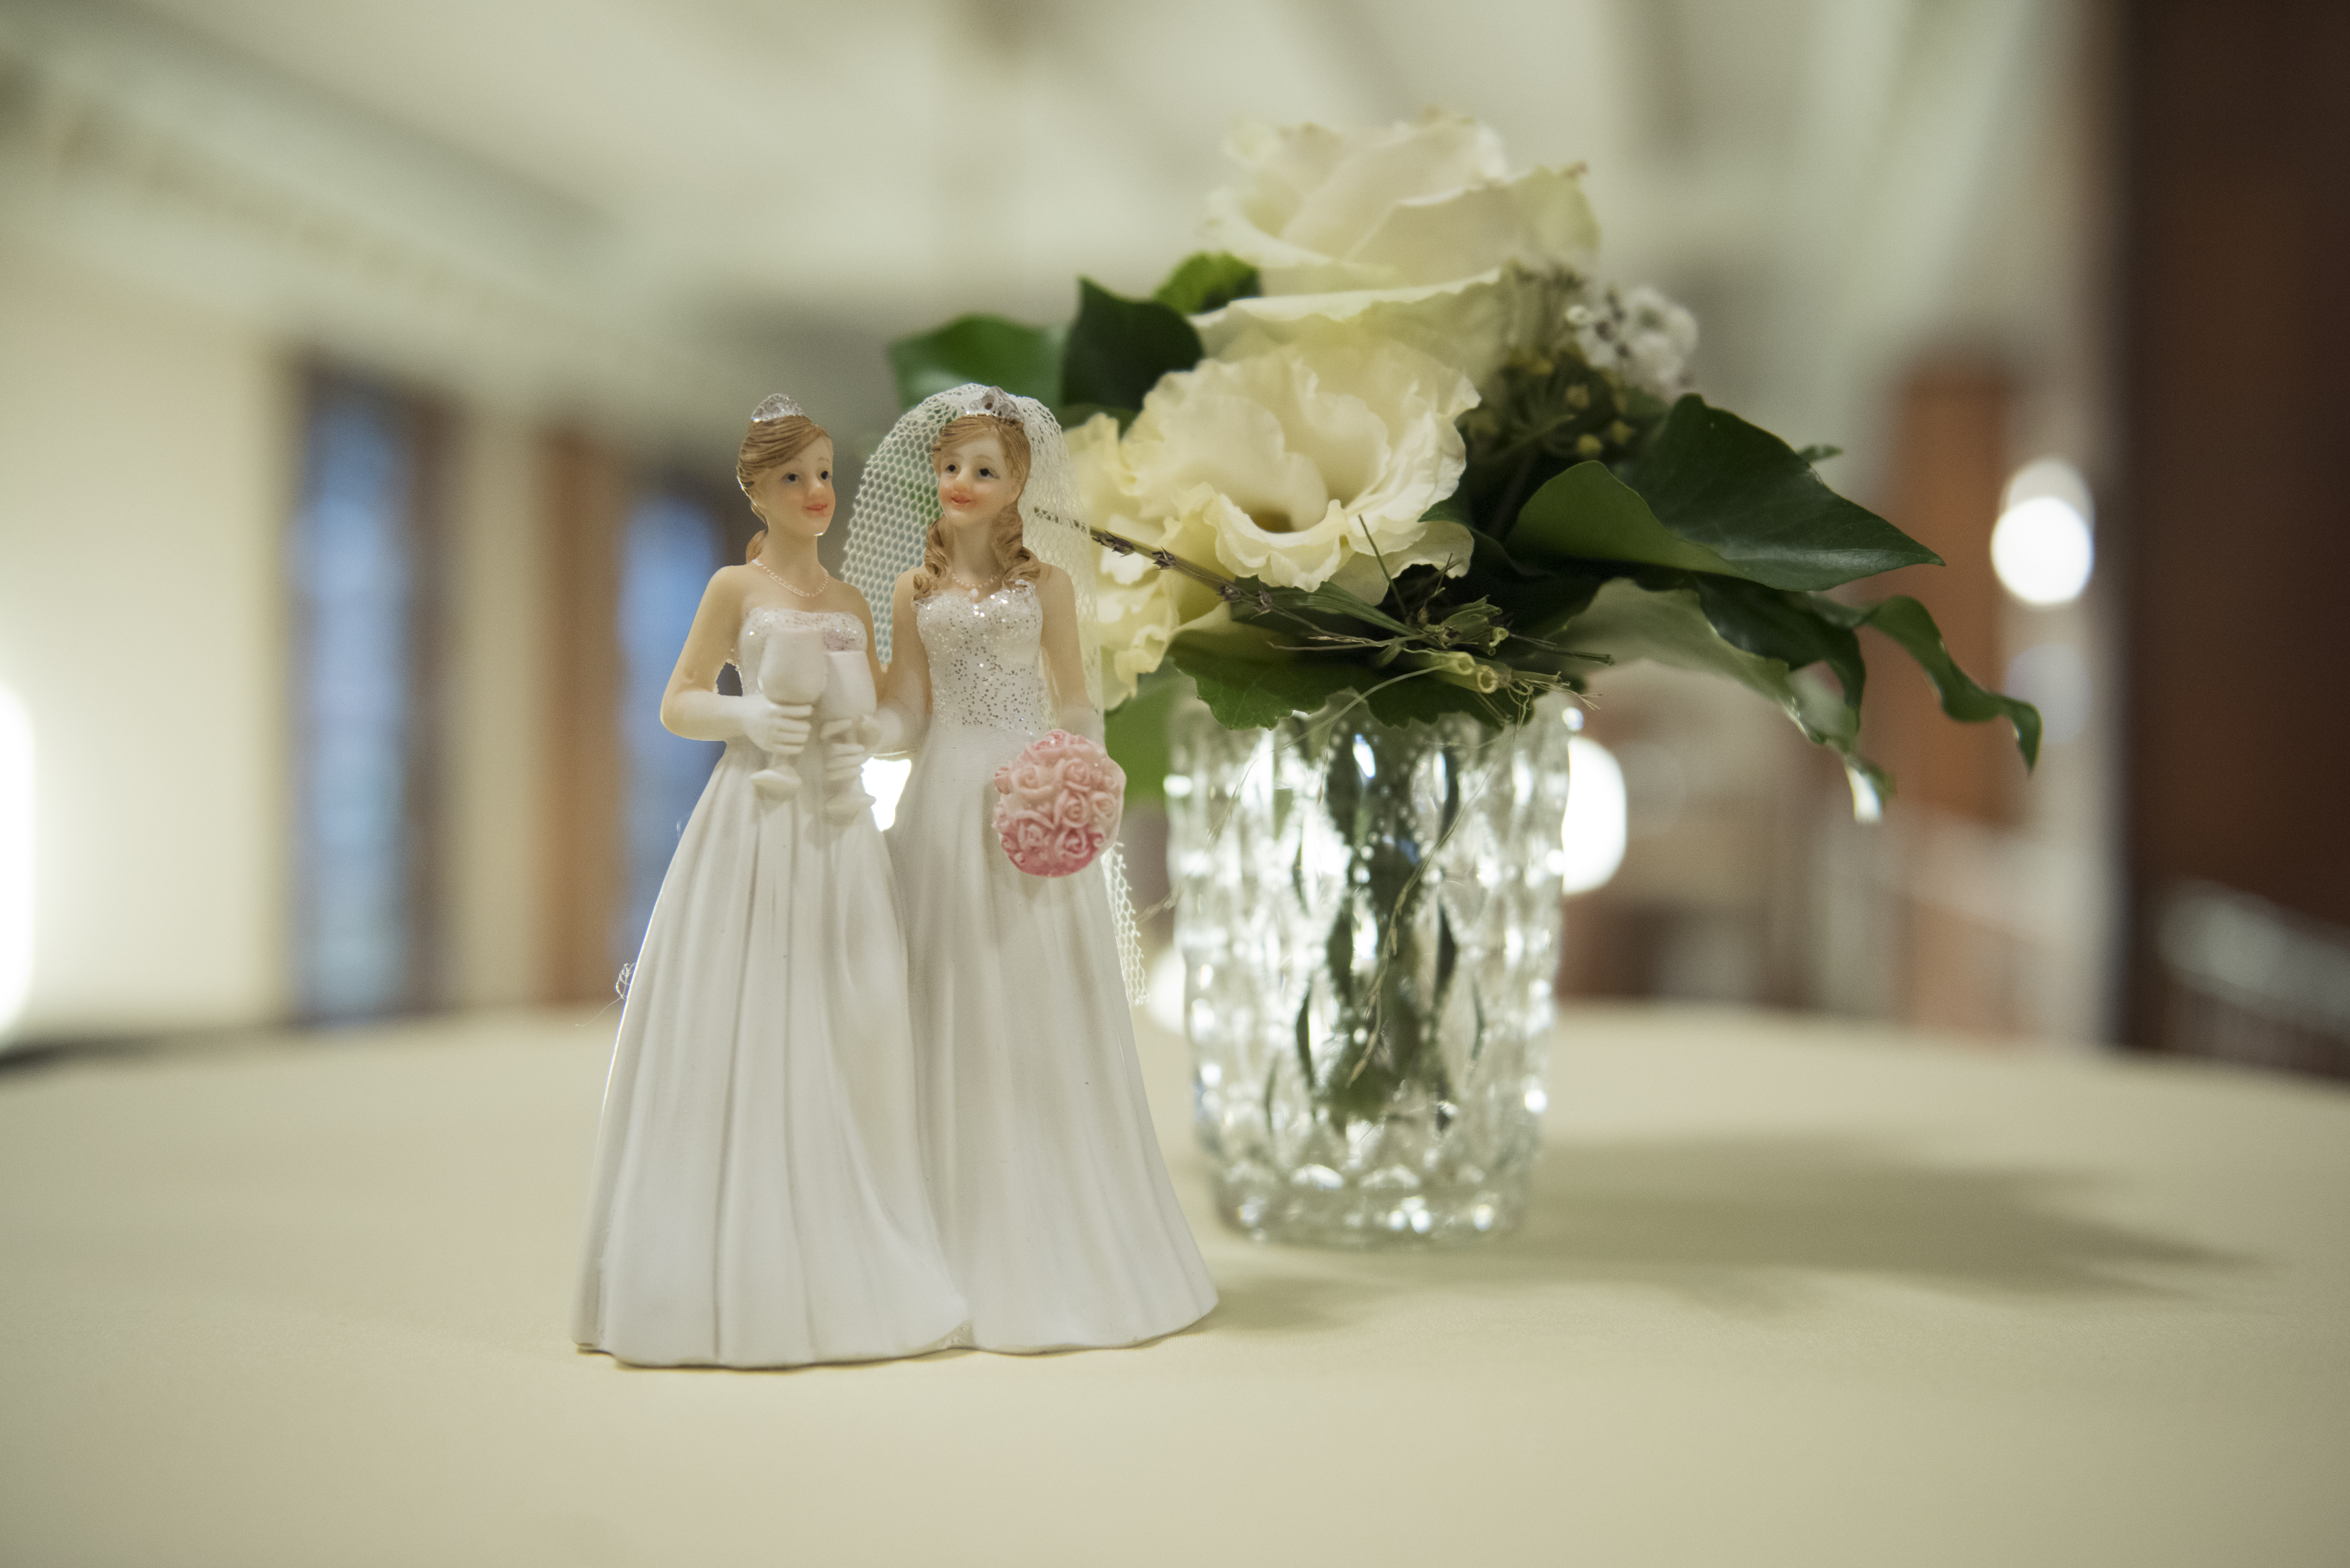 The Hallmark Channel Pulls Ads Featuring Same-Sex Marriage